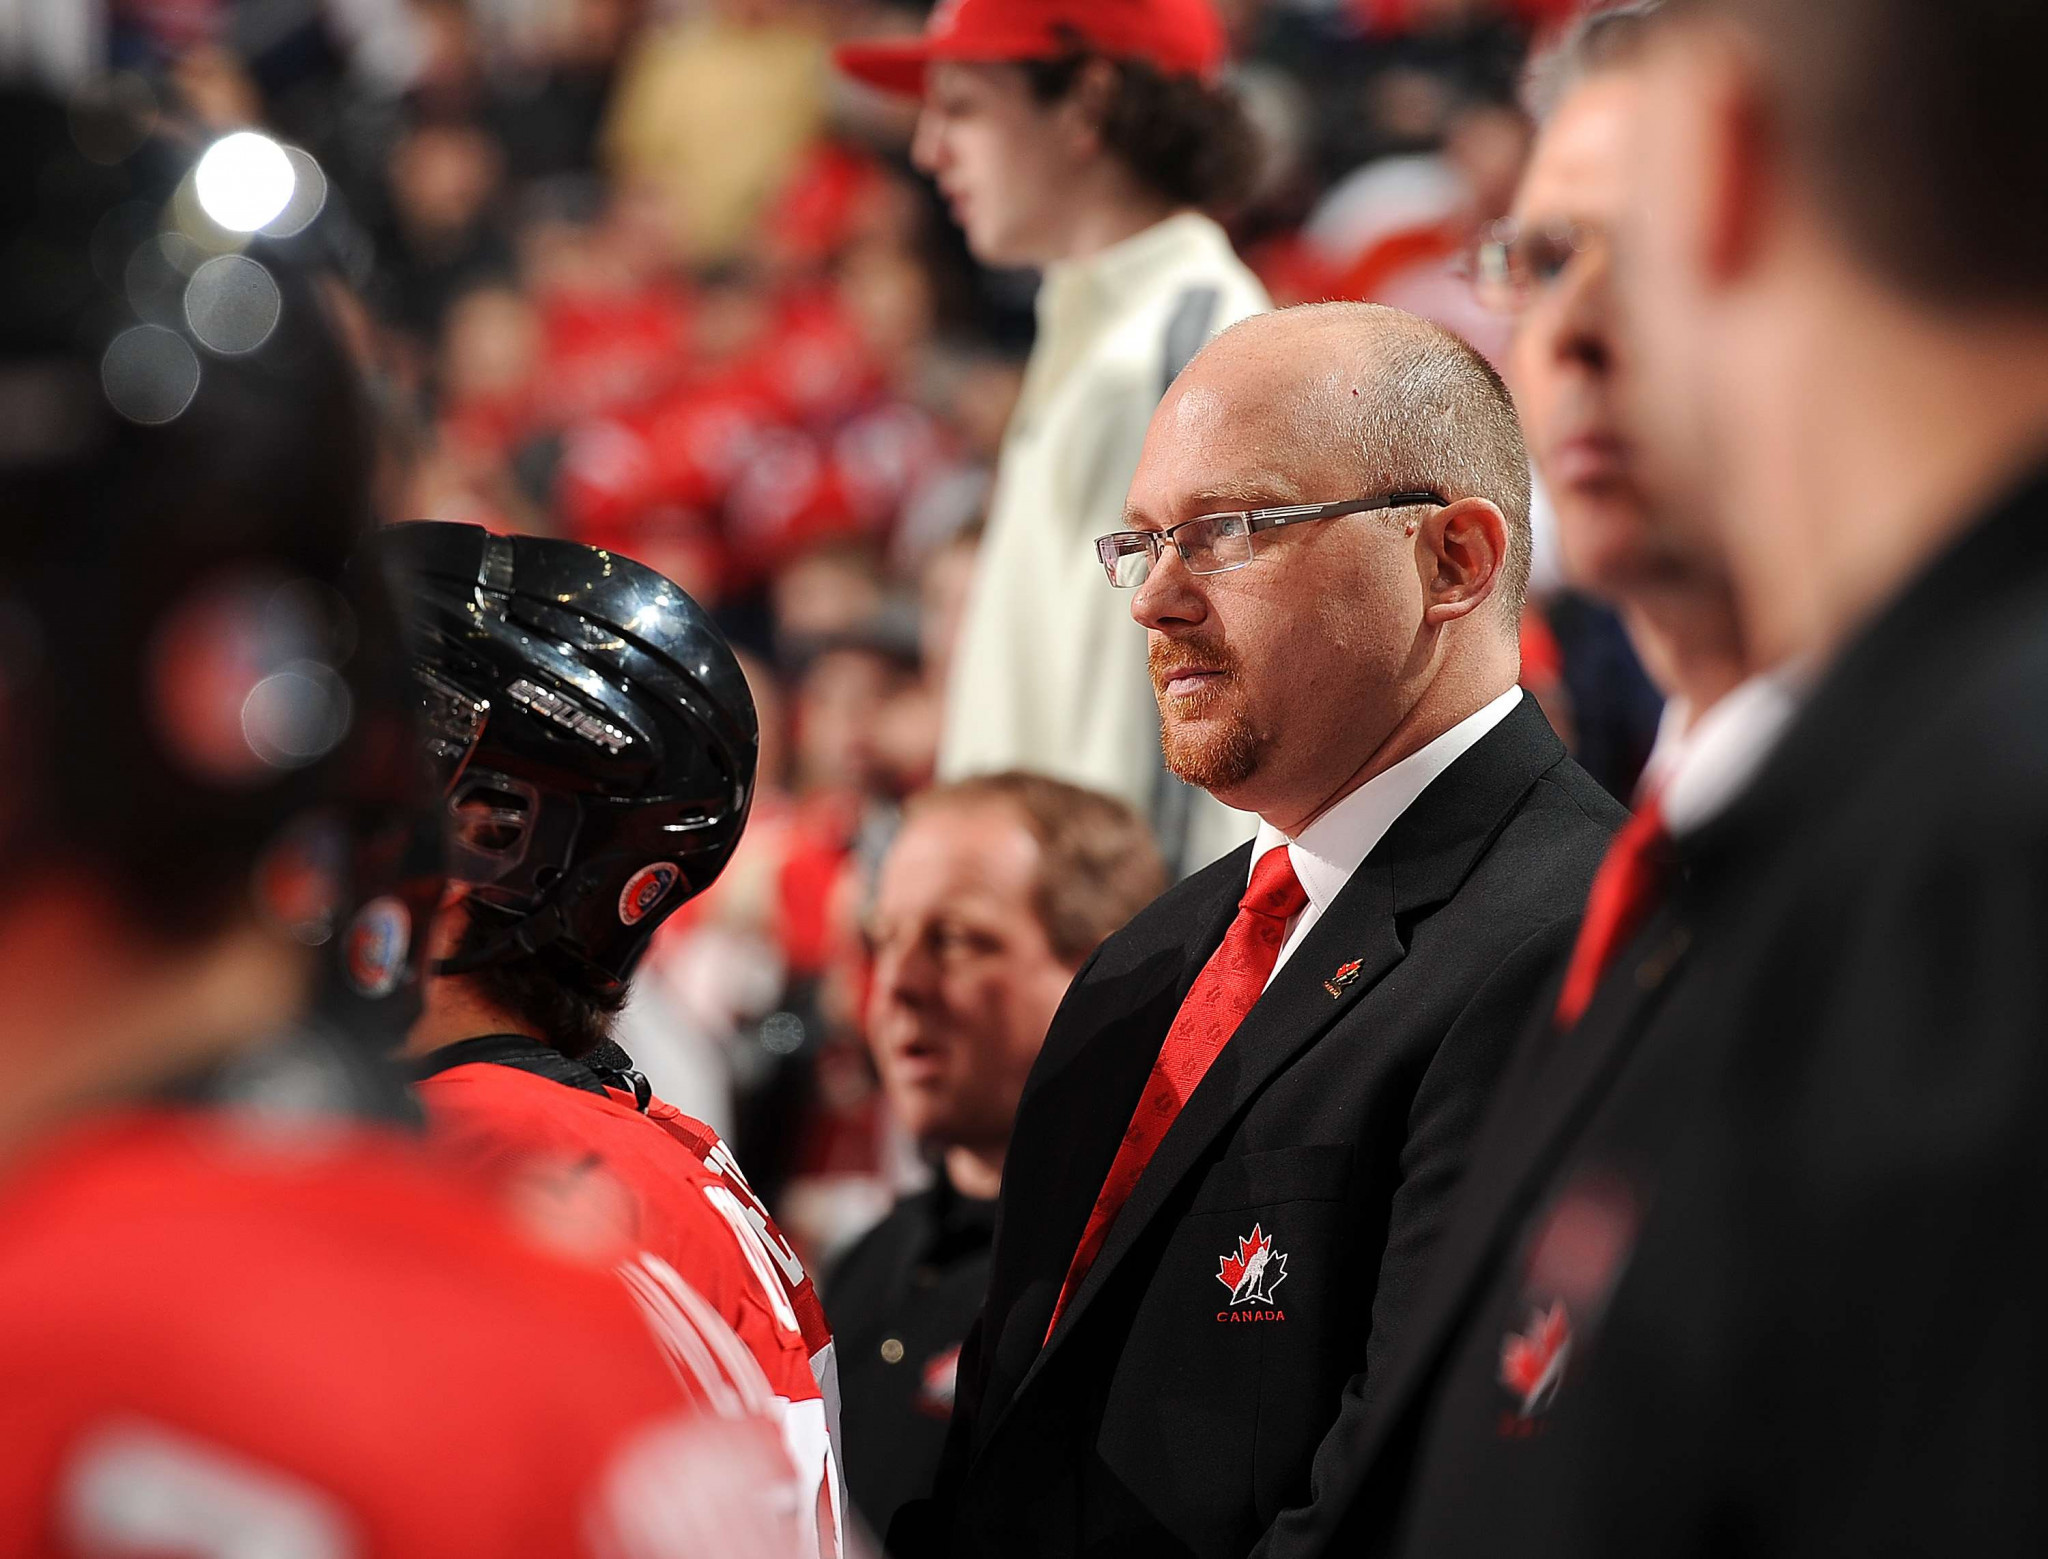 Hockey Canada appoint head coach for under-18 teams competing at summer tournament and training camp